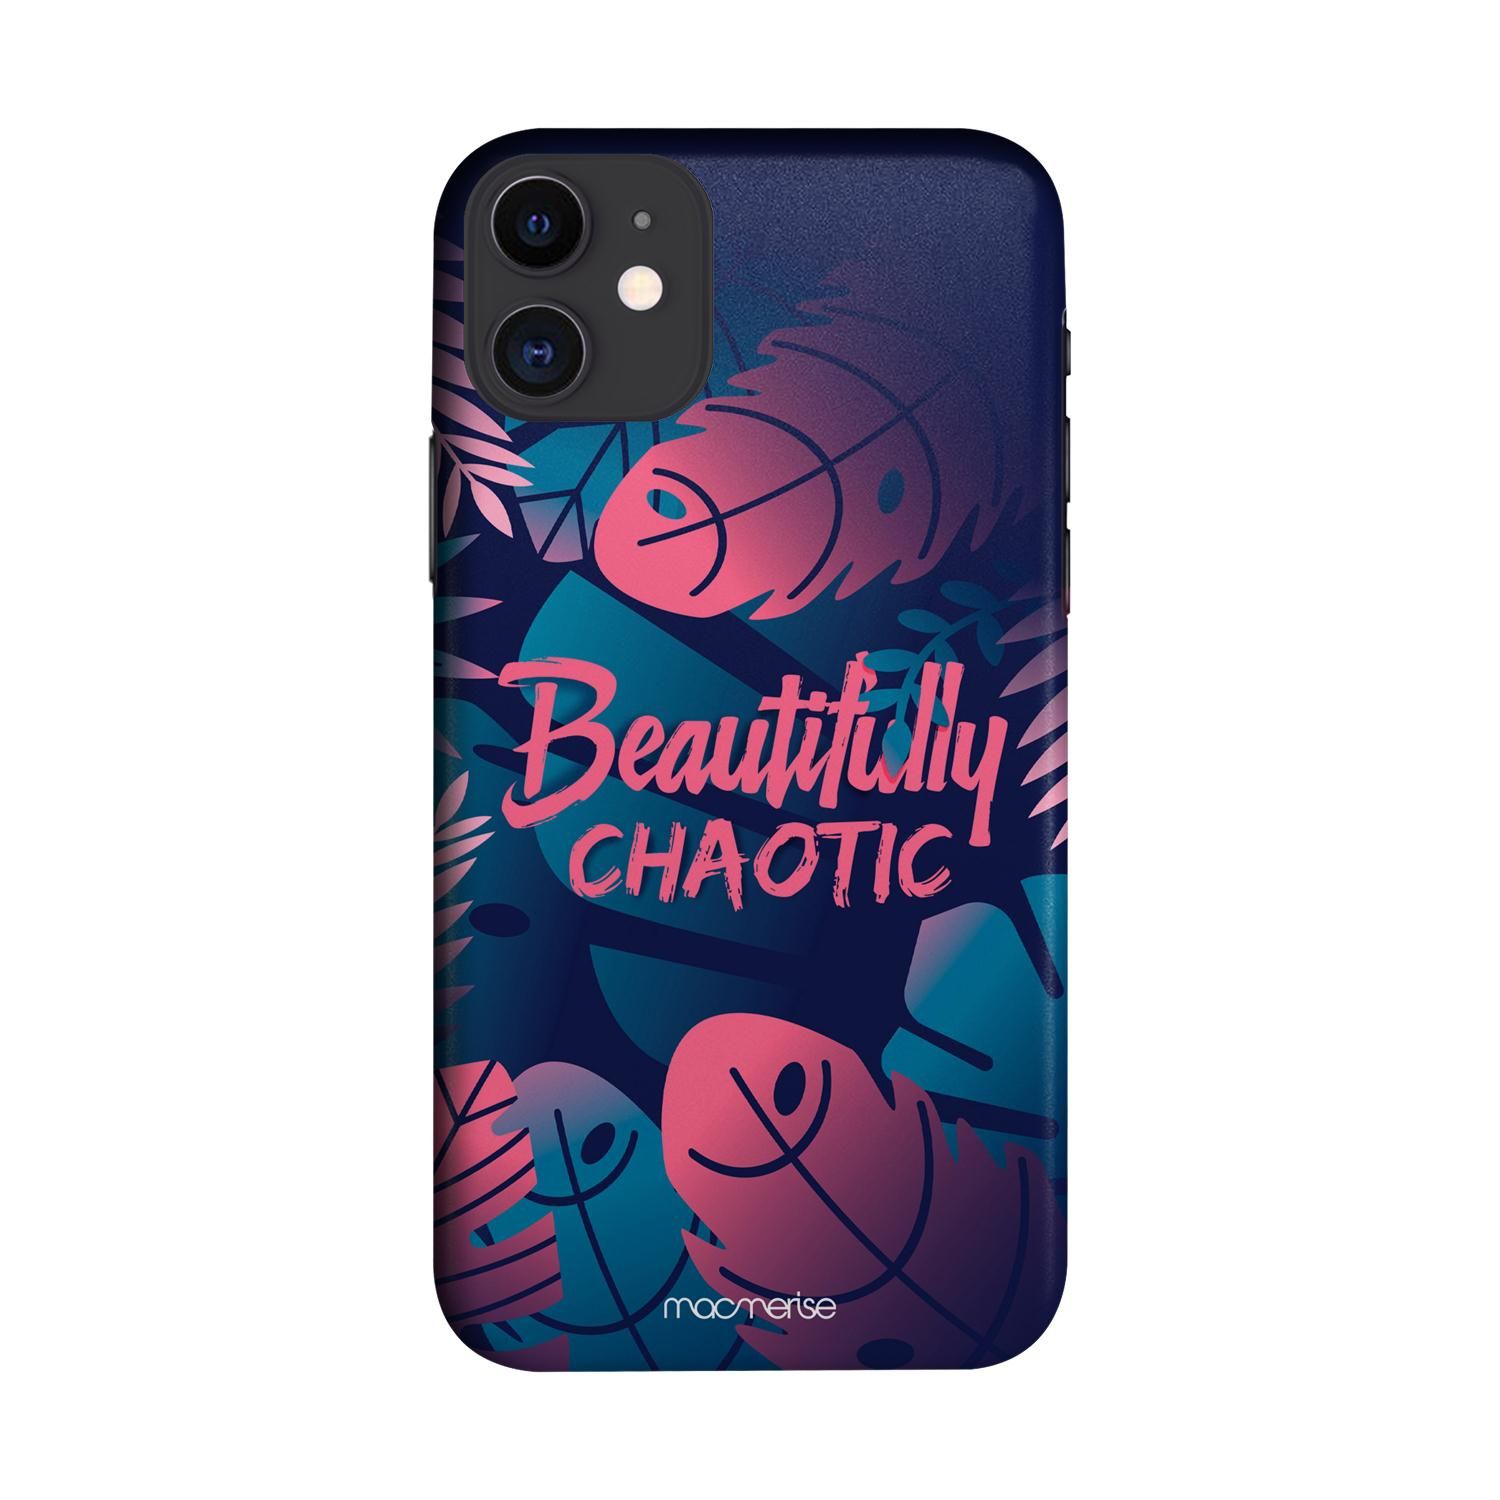 Buy Beautifully Chaotic - Sleek Phone Case for iPhone 11 Online